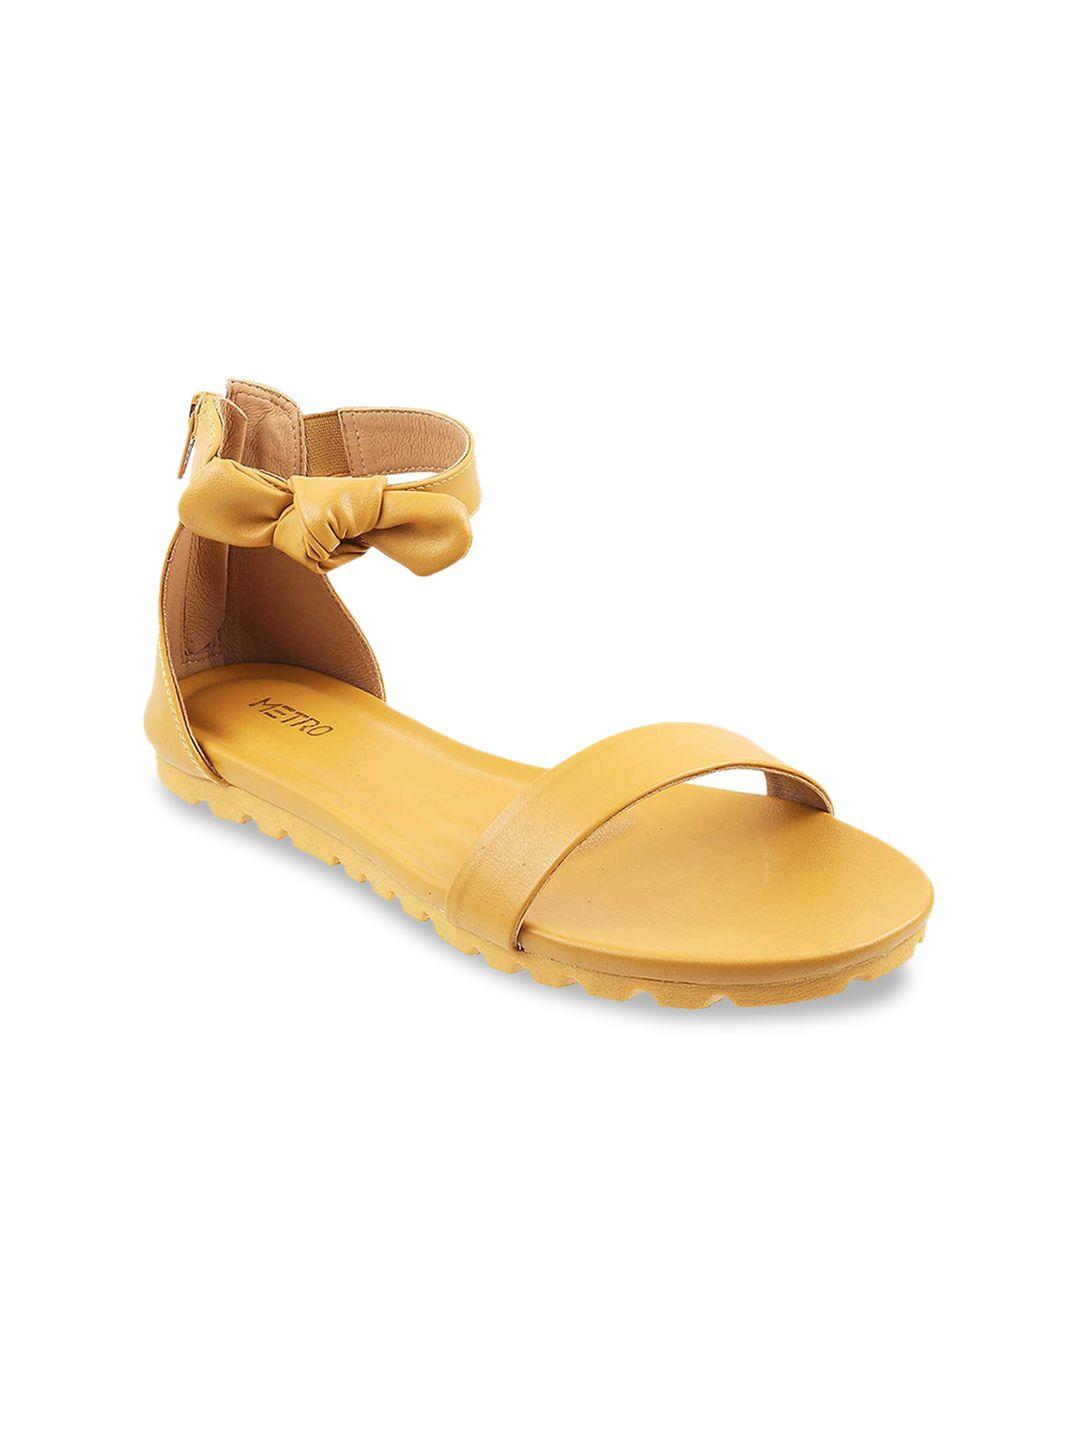 metro women yellow open toe flats with bows